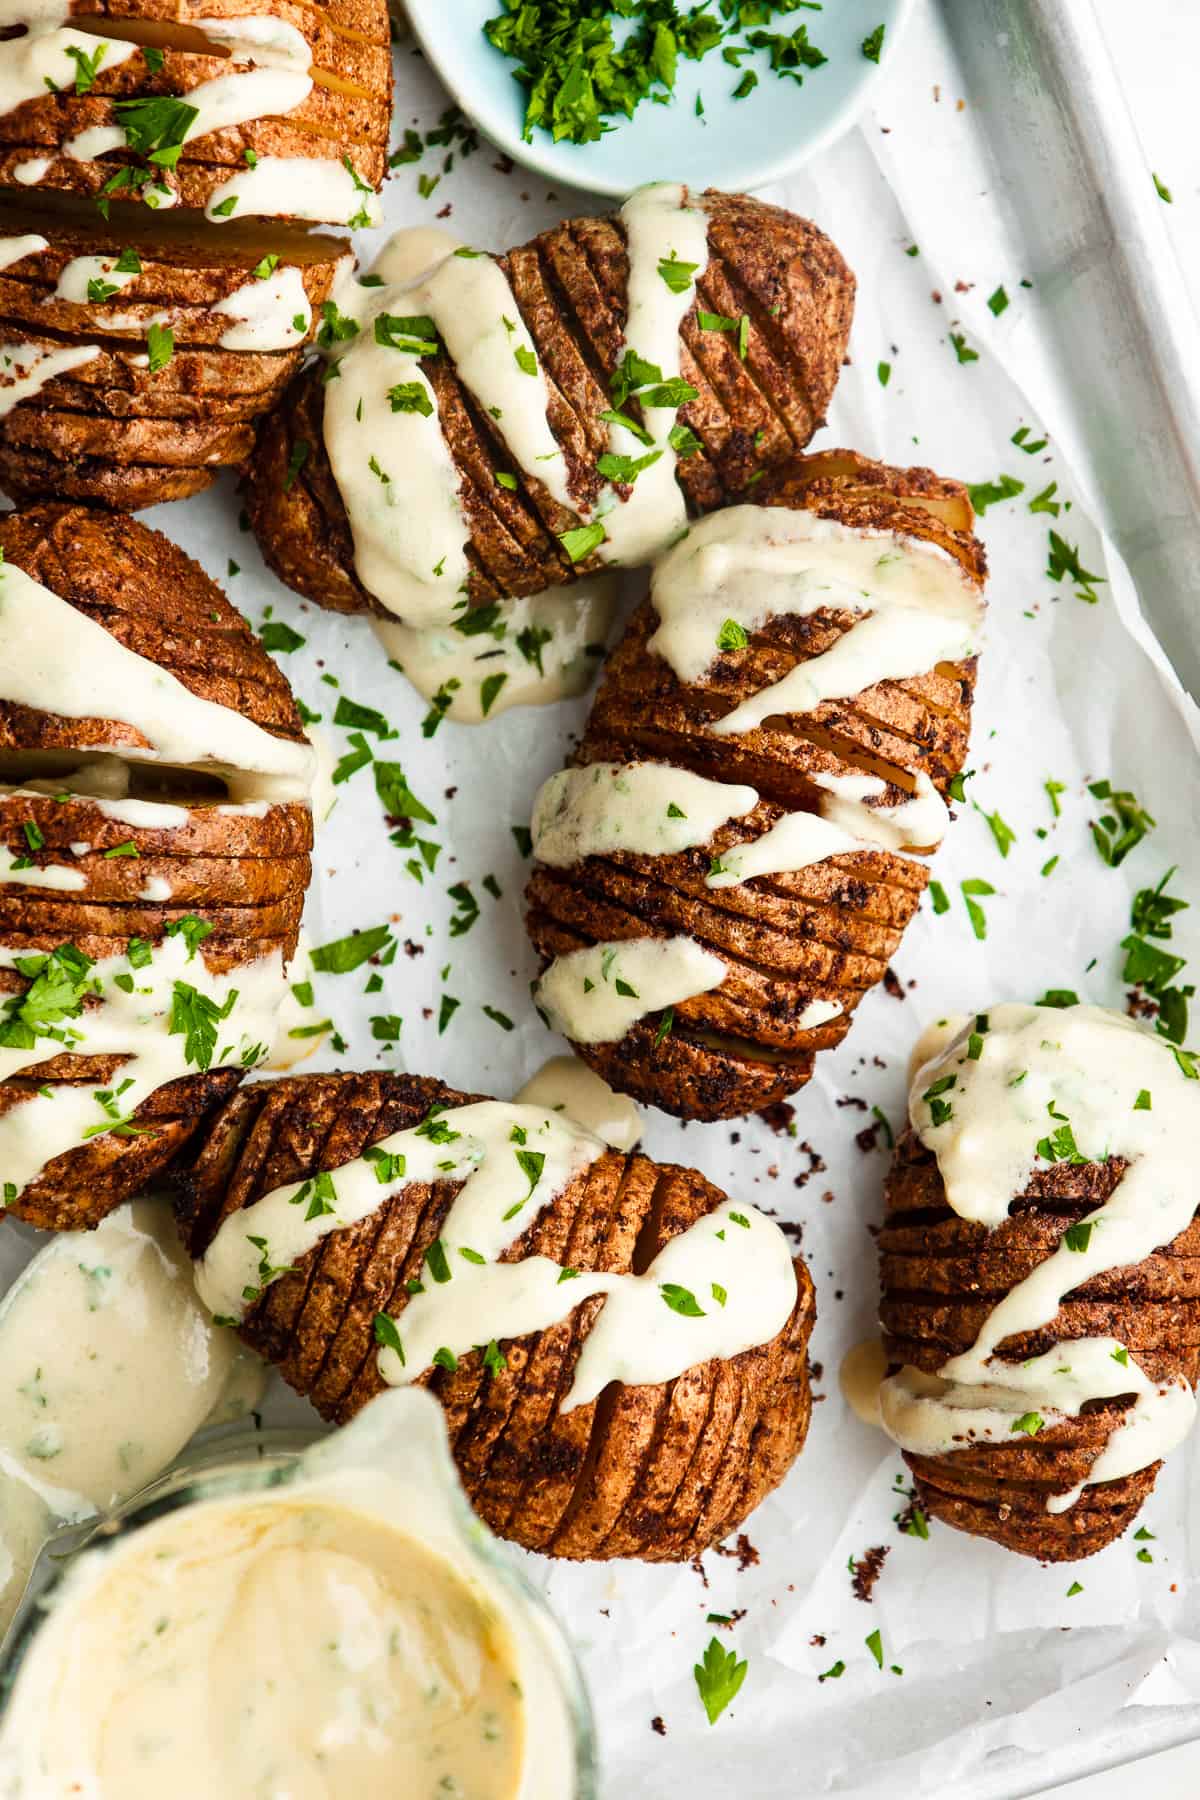 Hasselback potatoes served on a sheet tray, drizzled with tahini sauce.